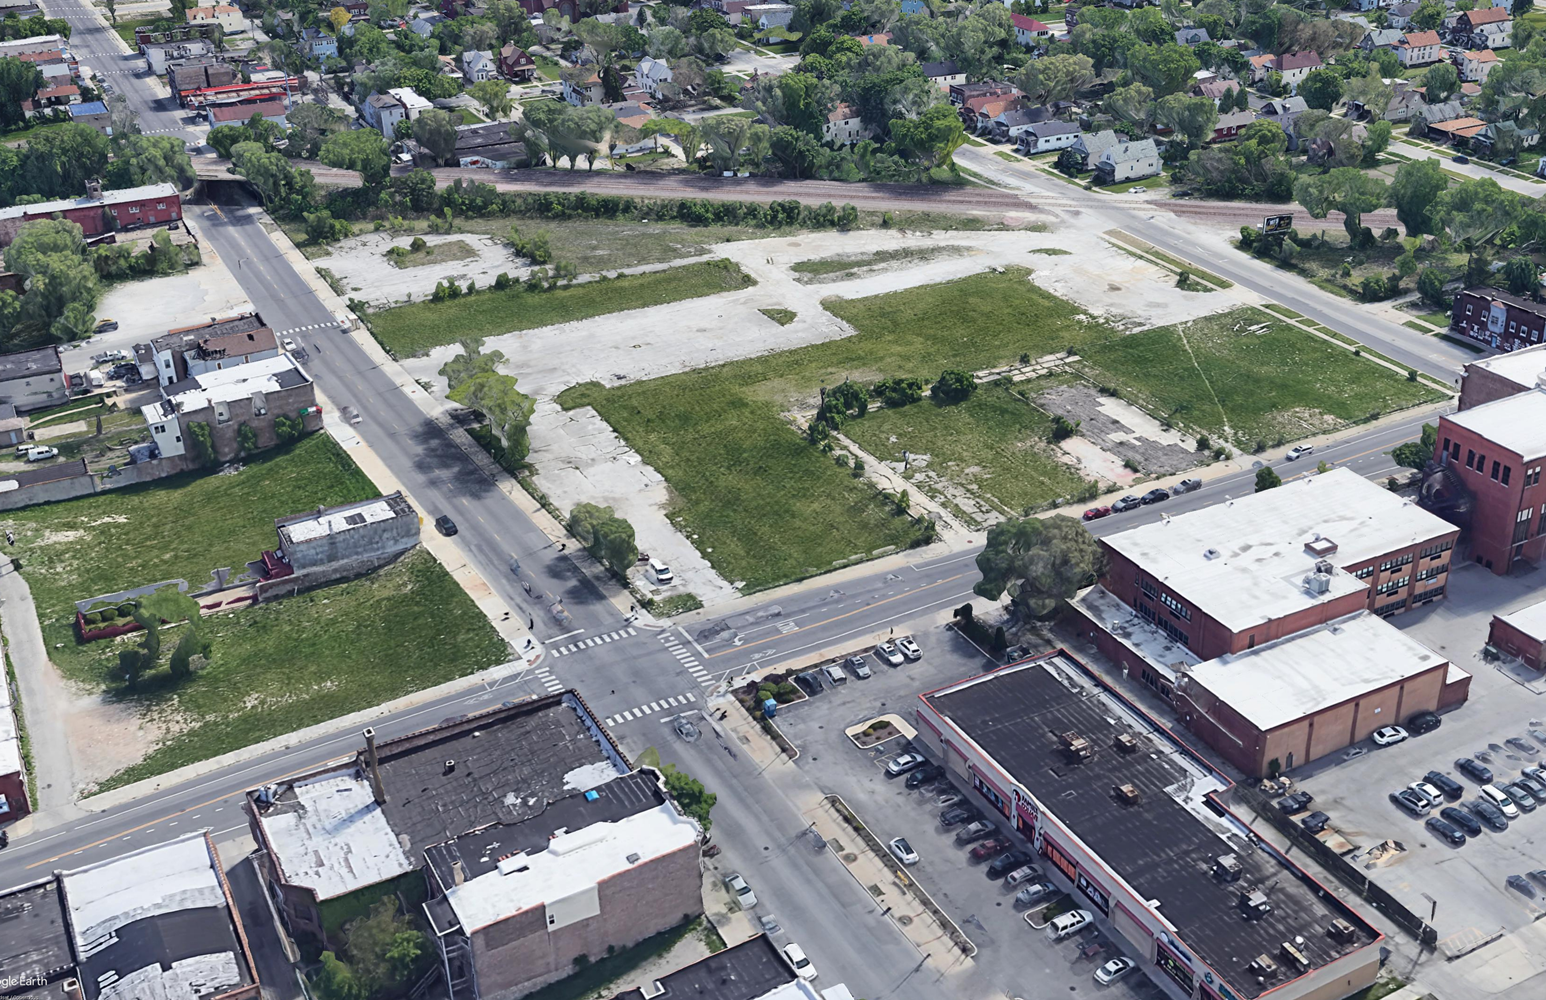 Aerial rendering of the Michigan Ave Station area existing conditions at an angle